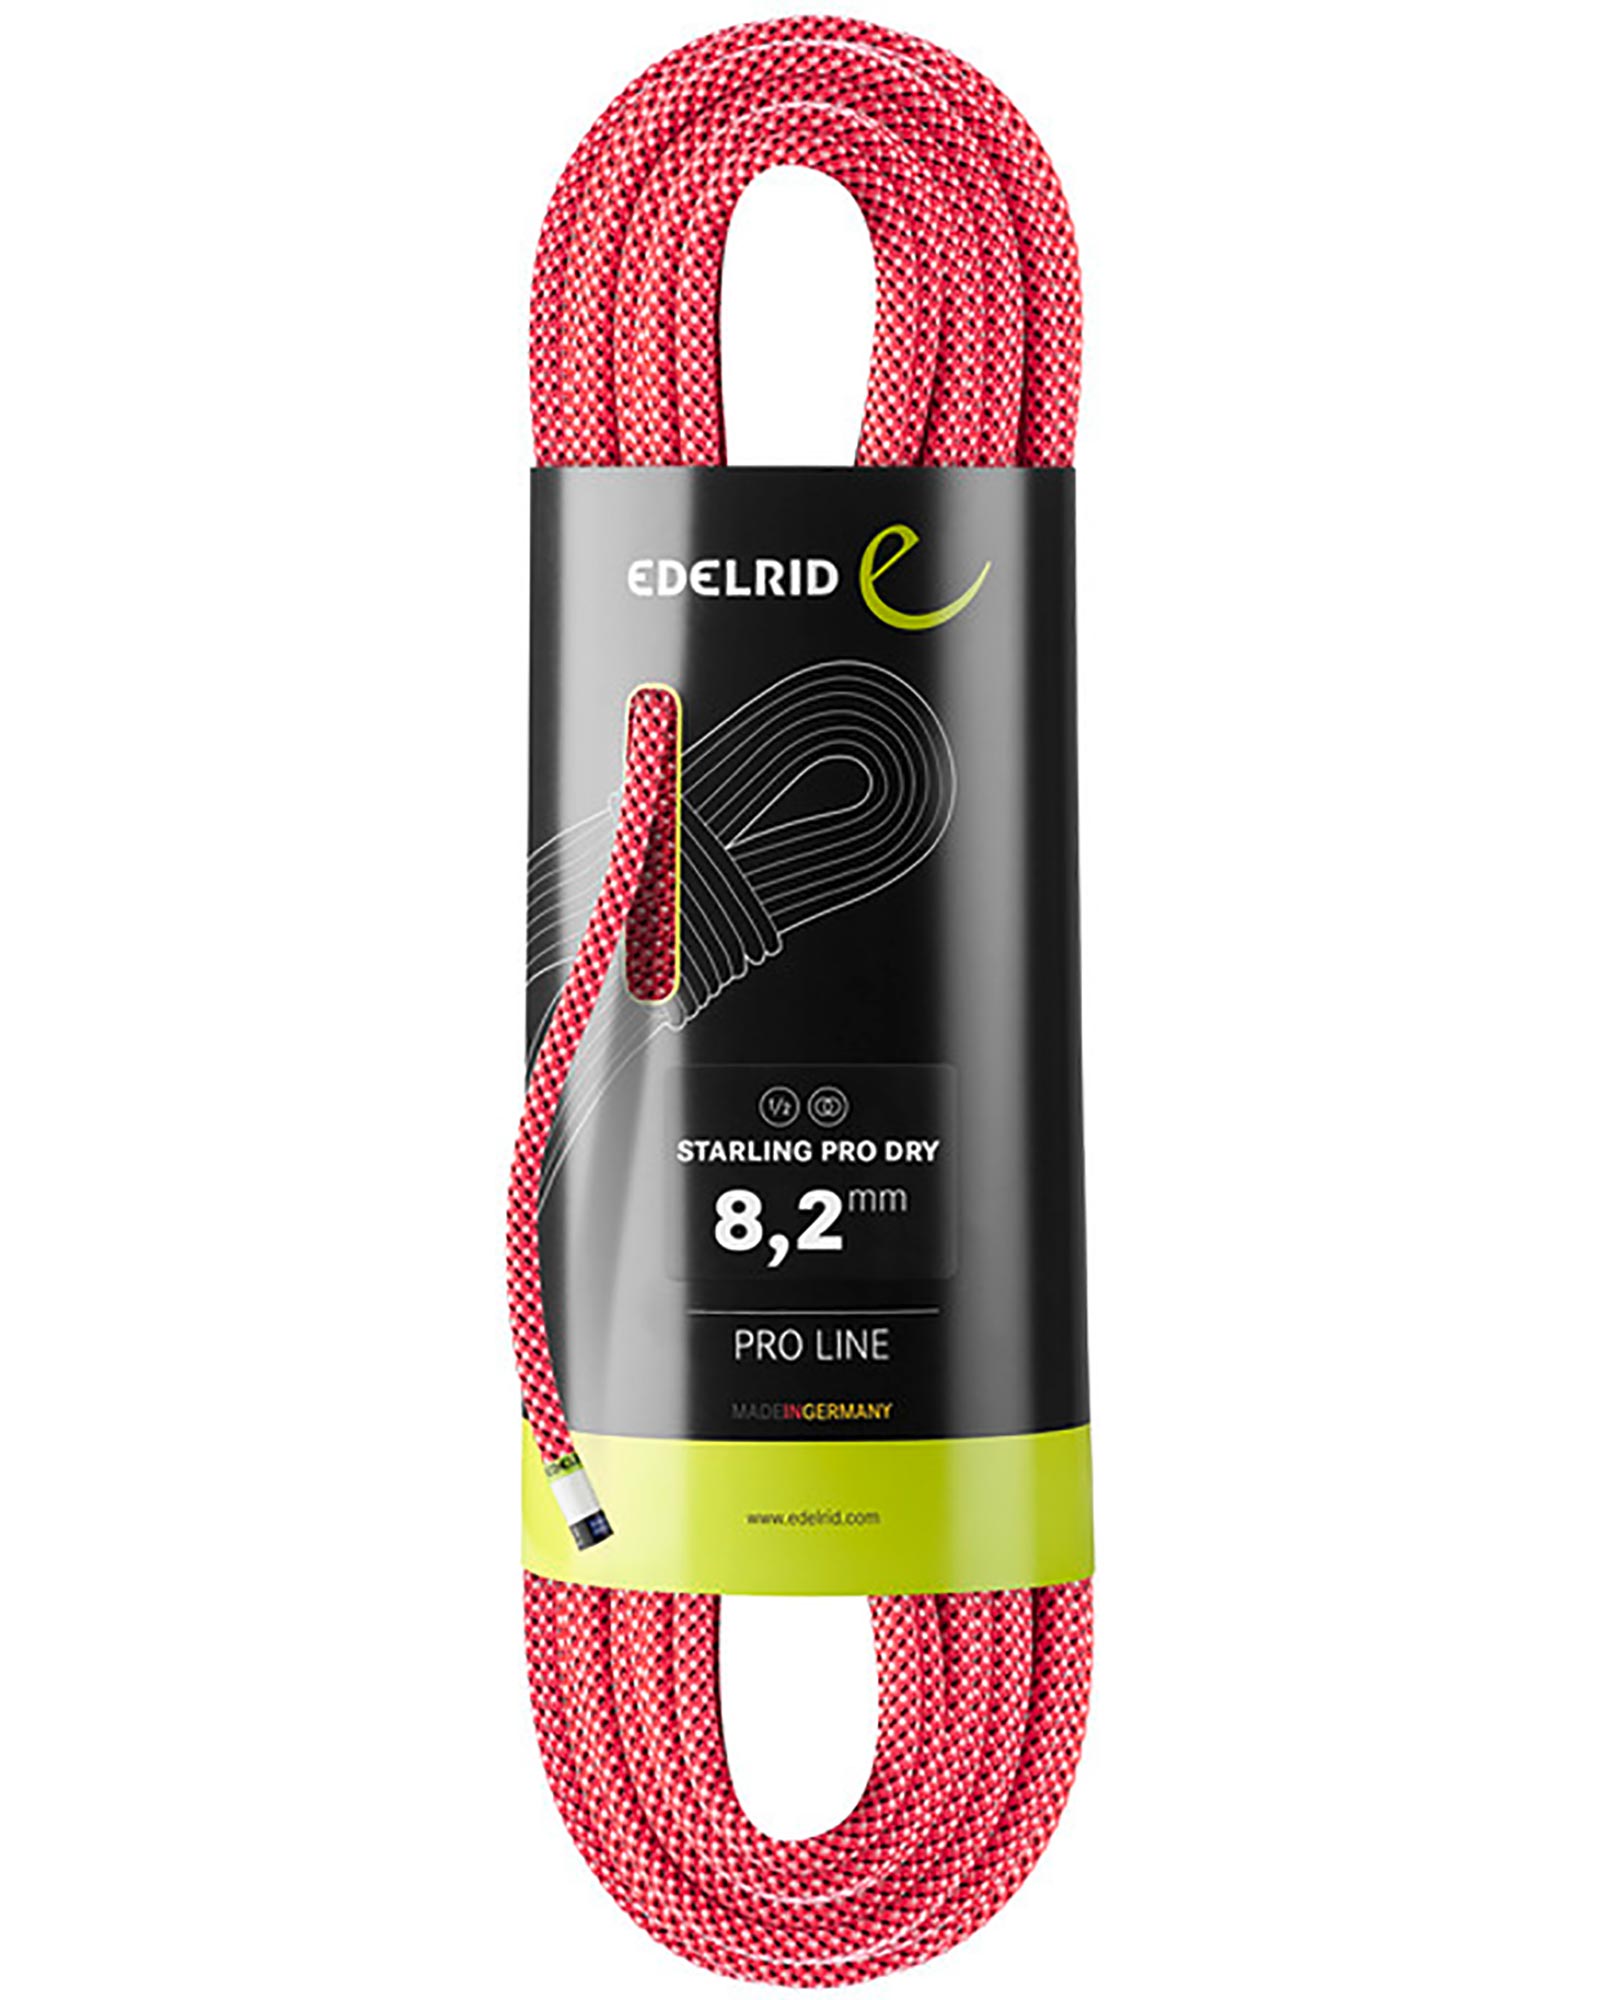 Edelrid Starling Pro Dry 8.2mm X 50m Rope